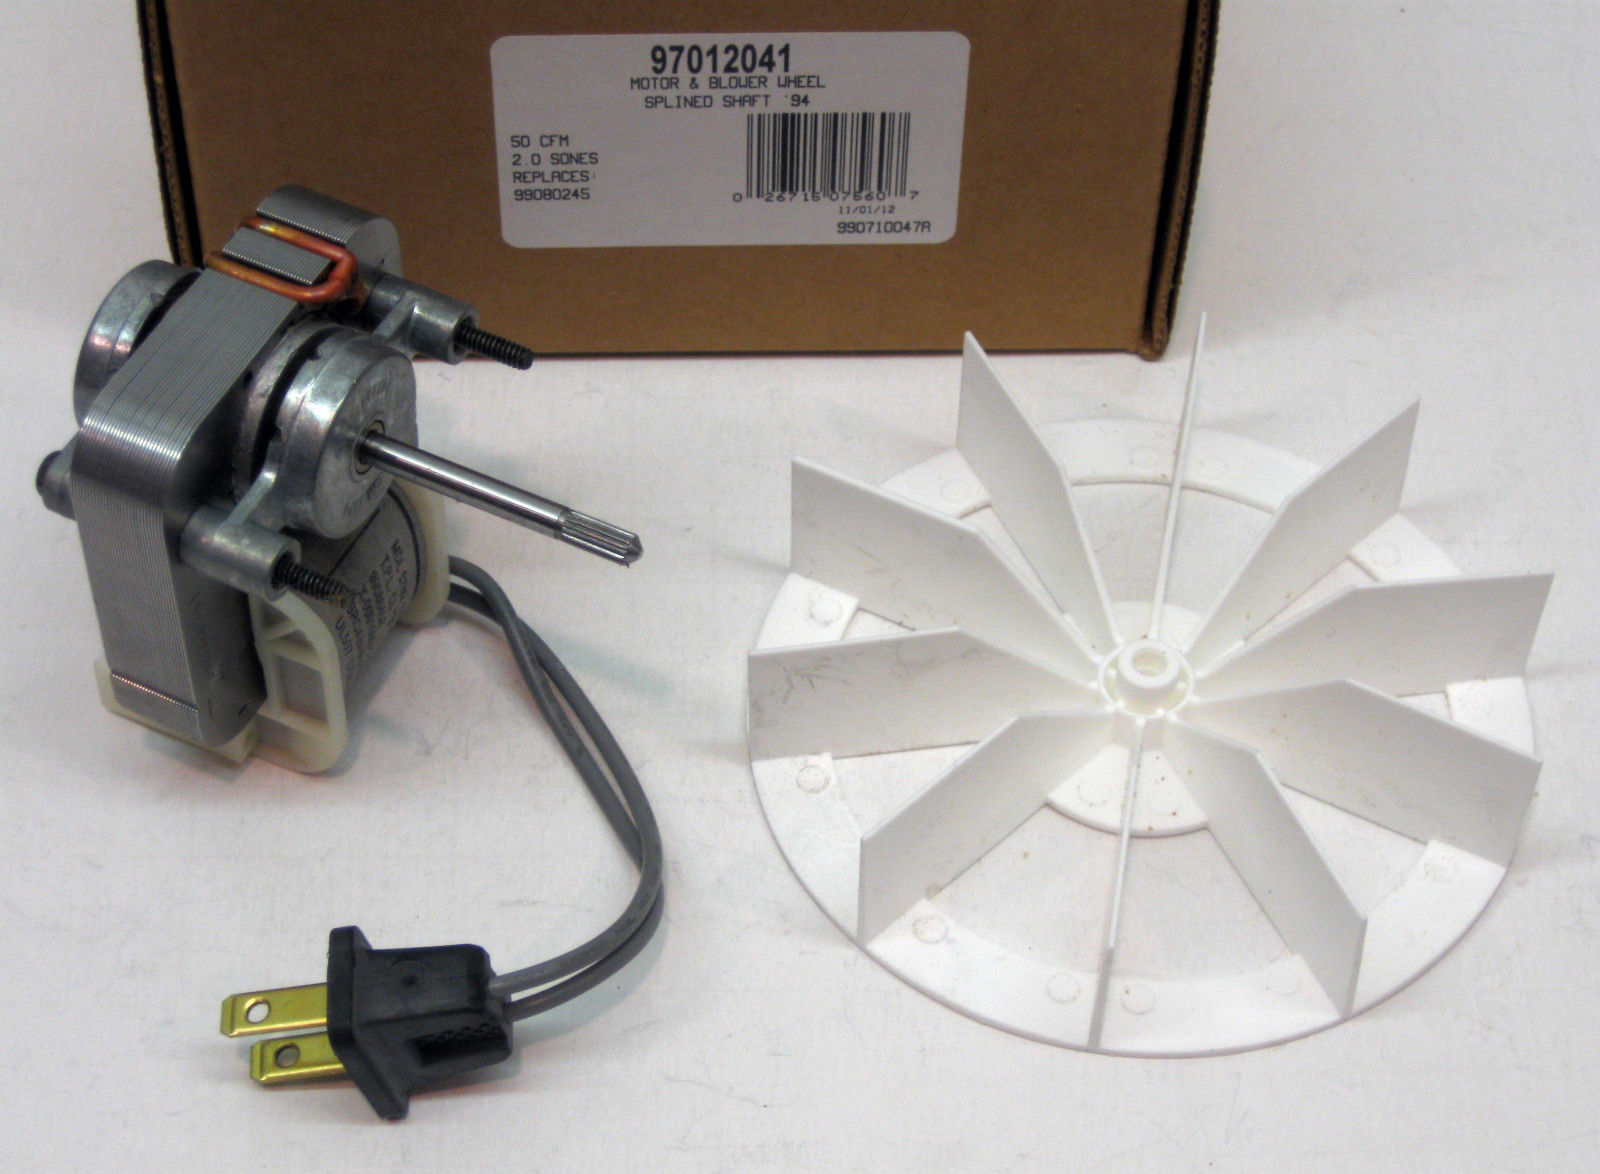 Broan Bathroom Fan Replacement Motor Image Of Bathroom And with sizing 1600 X 1174